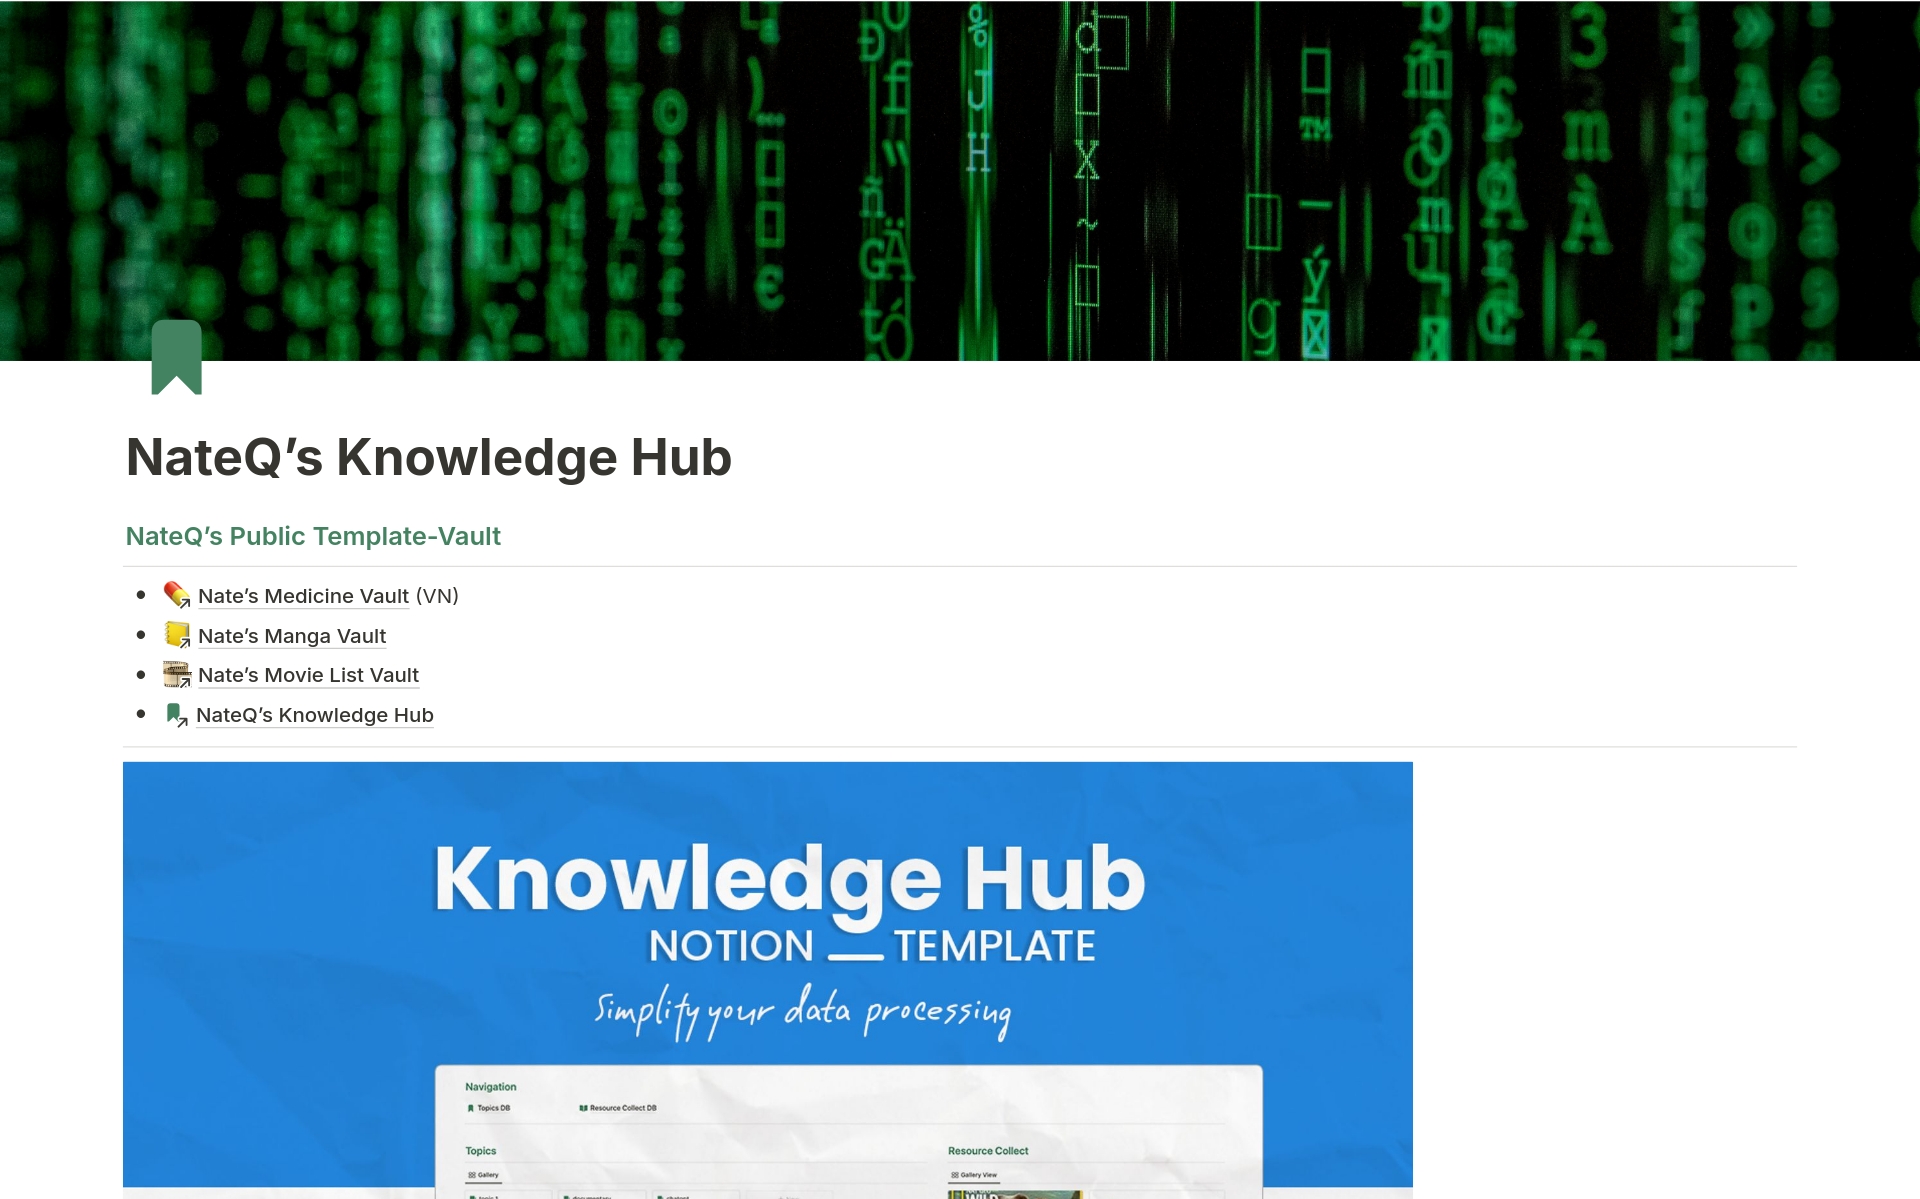 This Knowledge Hub will turn Notion into an information transmission station, not a Second Brain, but it will help you organize almost all knowledge by topic. It will handle the first three information processing steps: Gather, Process, Store.